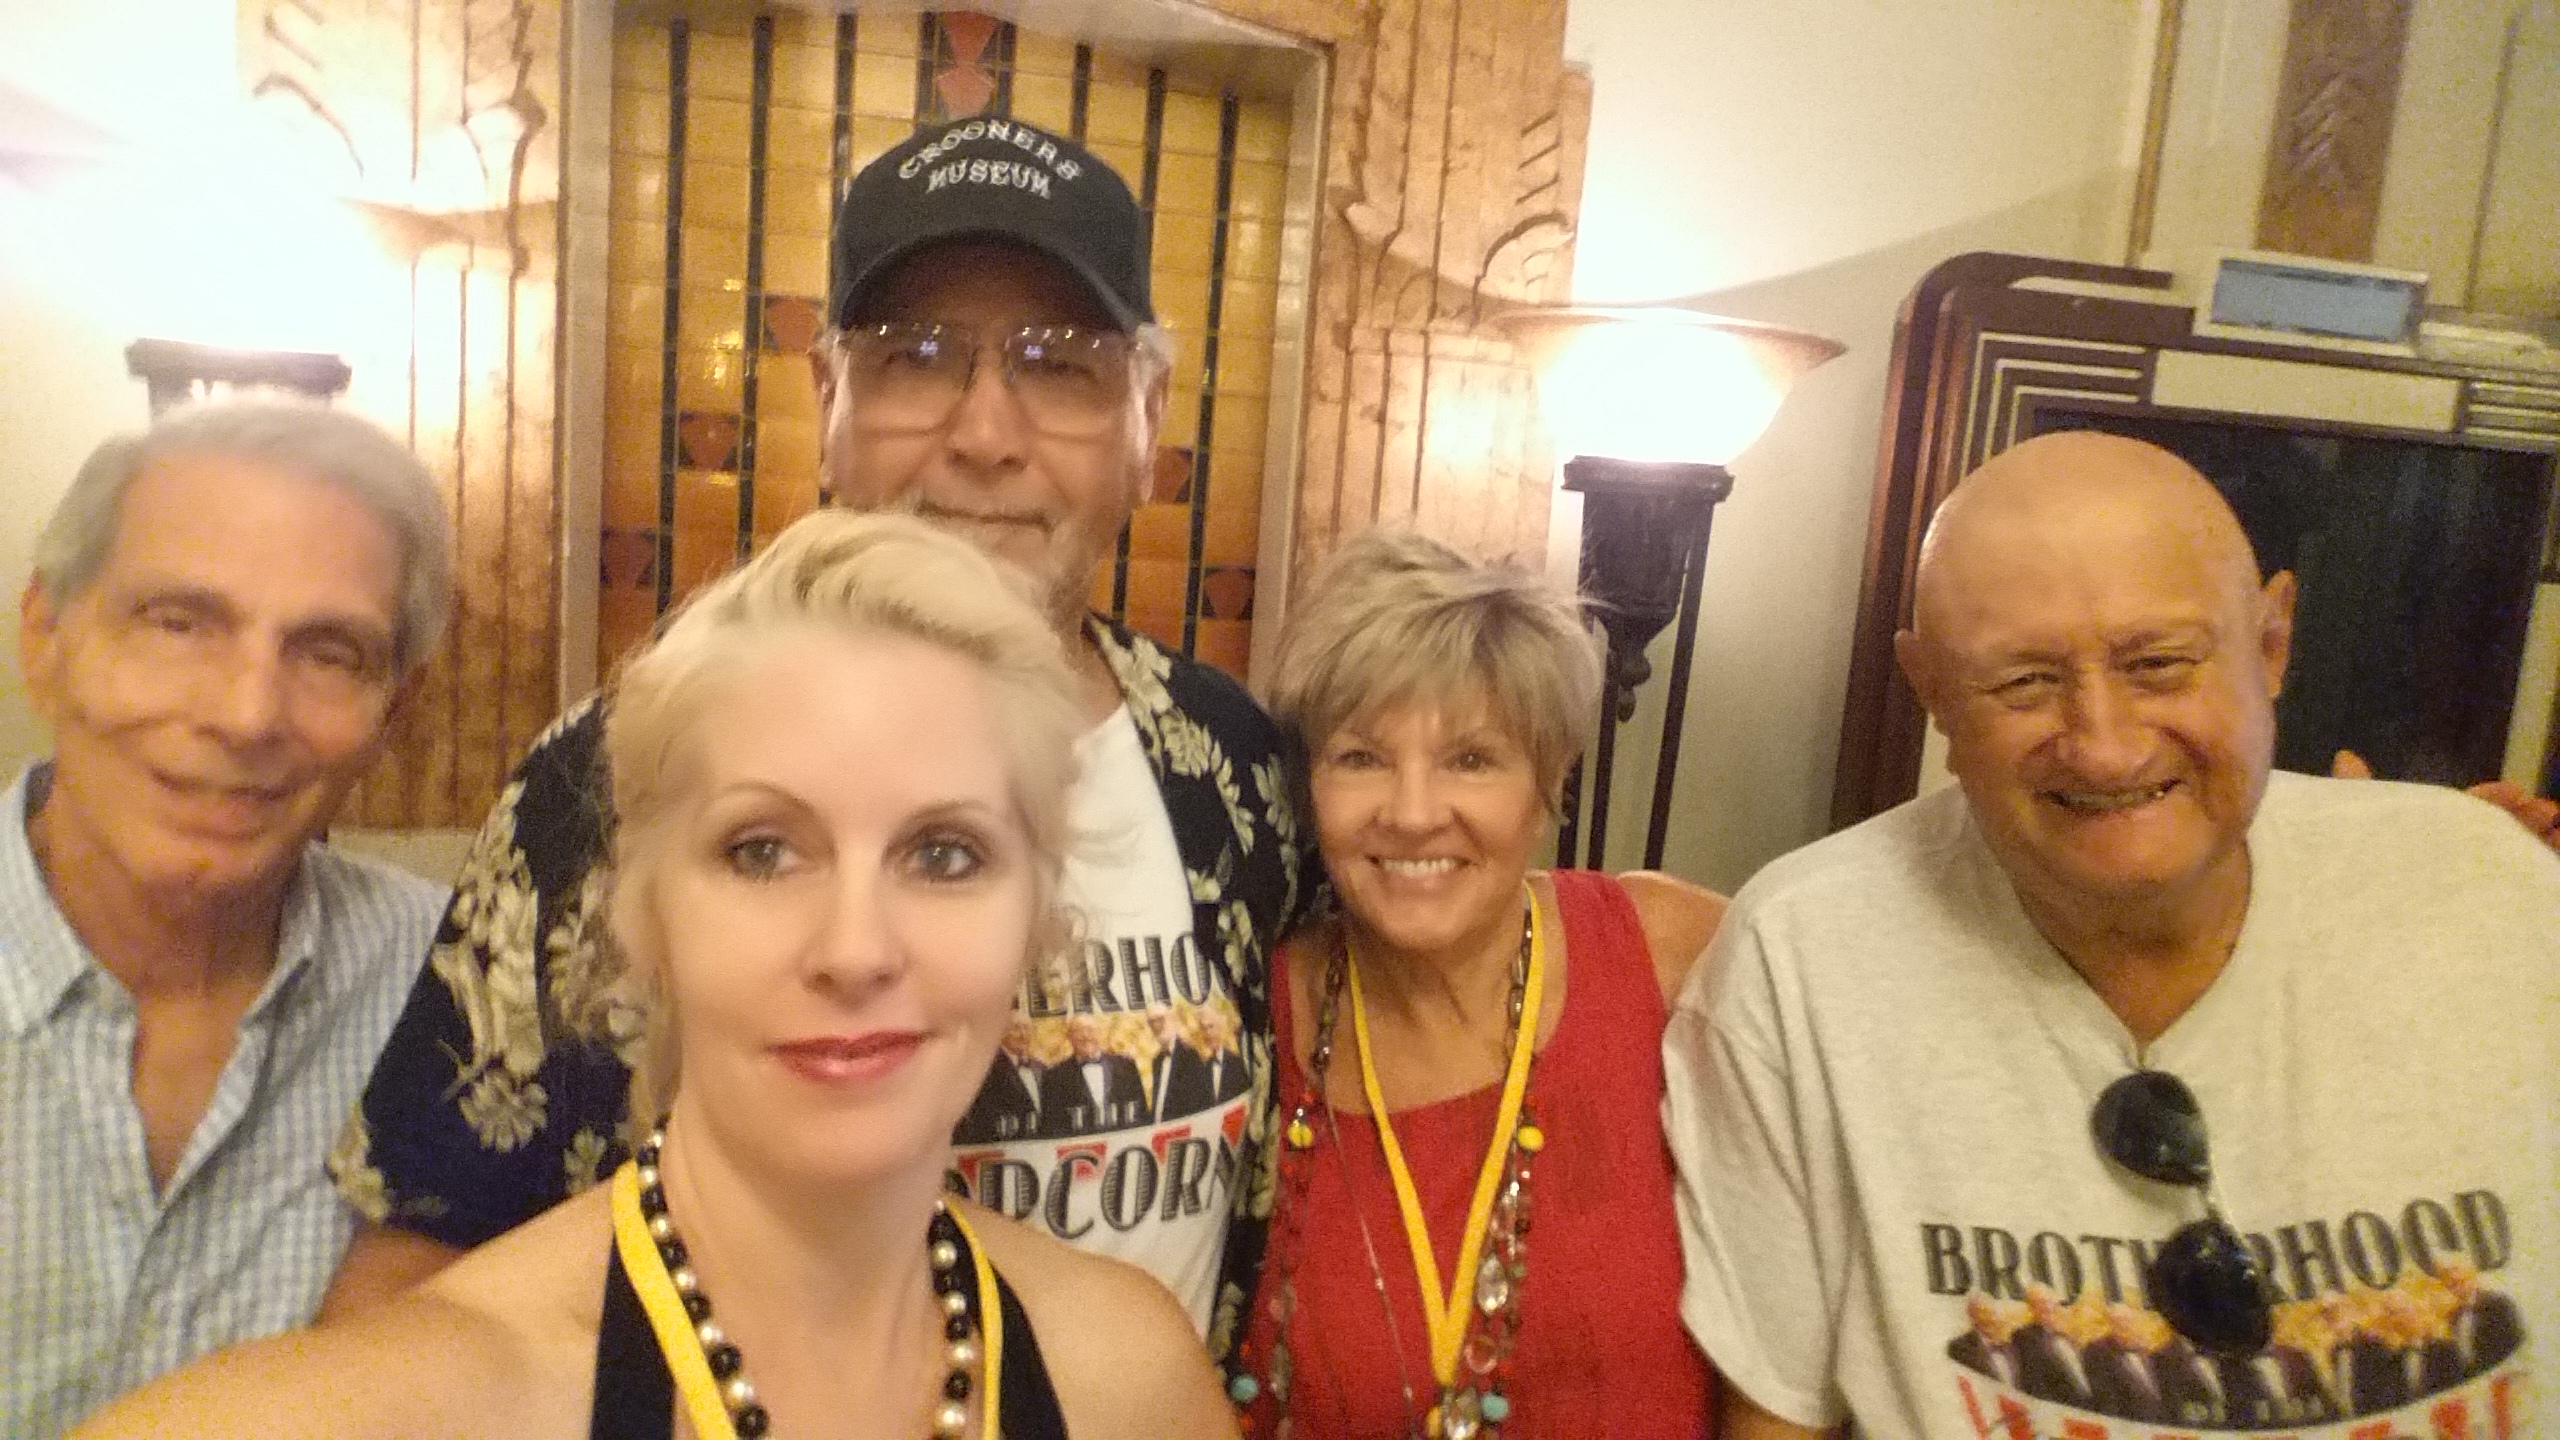 Cast and crew members of The Brotherhood of the Popcorn at at San Pedro International Film Festival,California. Animator Bill Exter, Rockabilly Crooner Dennis Penna, Assistant Director Amy Beth Goodrich, Sandy Wise and Fish truck driver Jack Tuerk